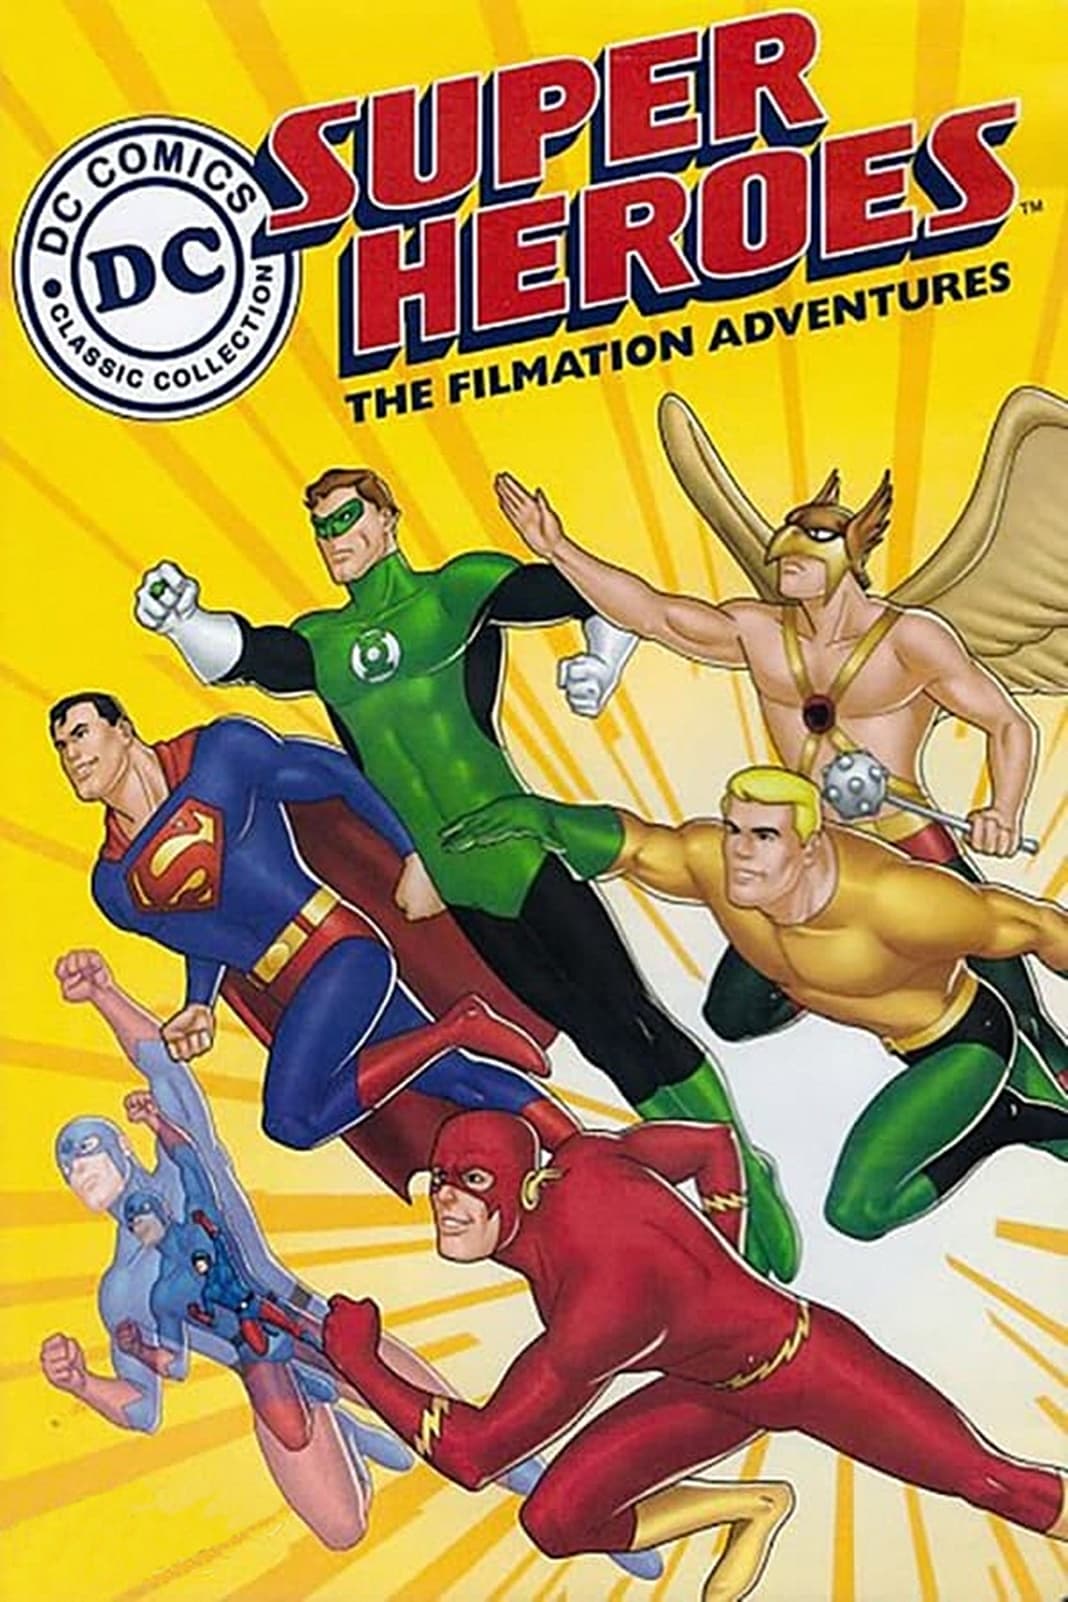 DC Super Heroes: The Filmation Adventures (1967)